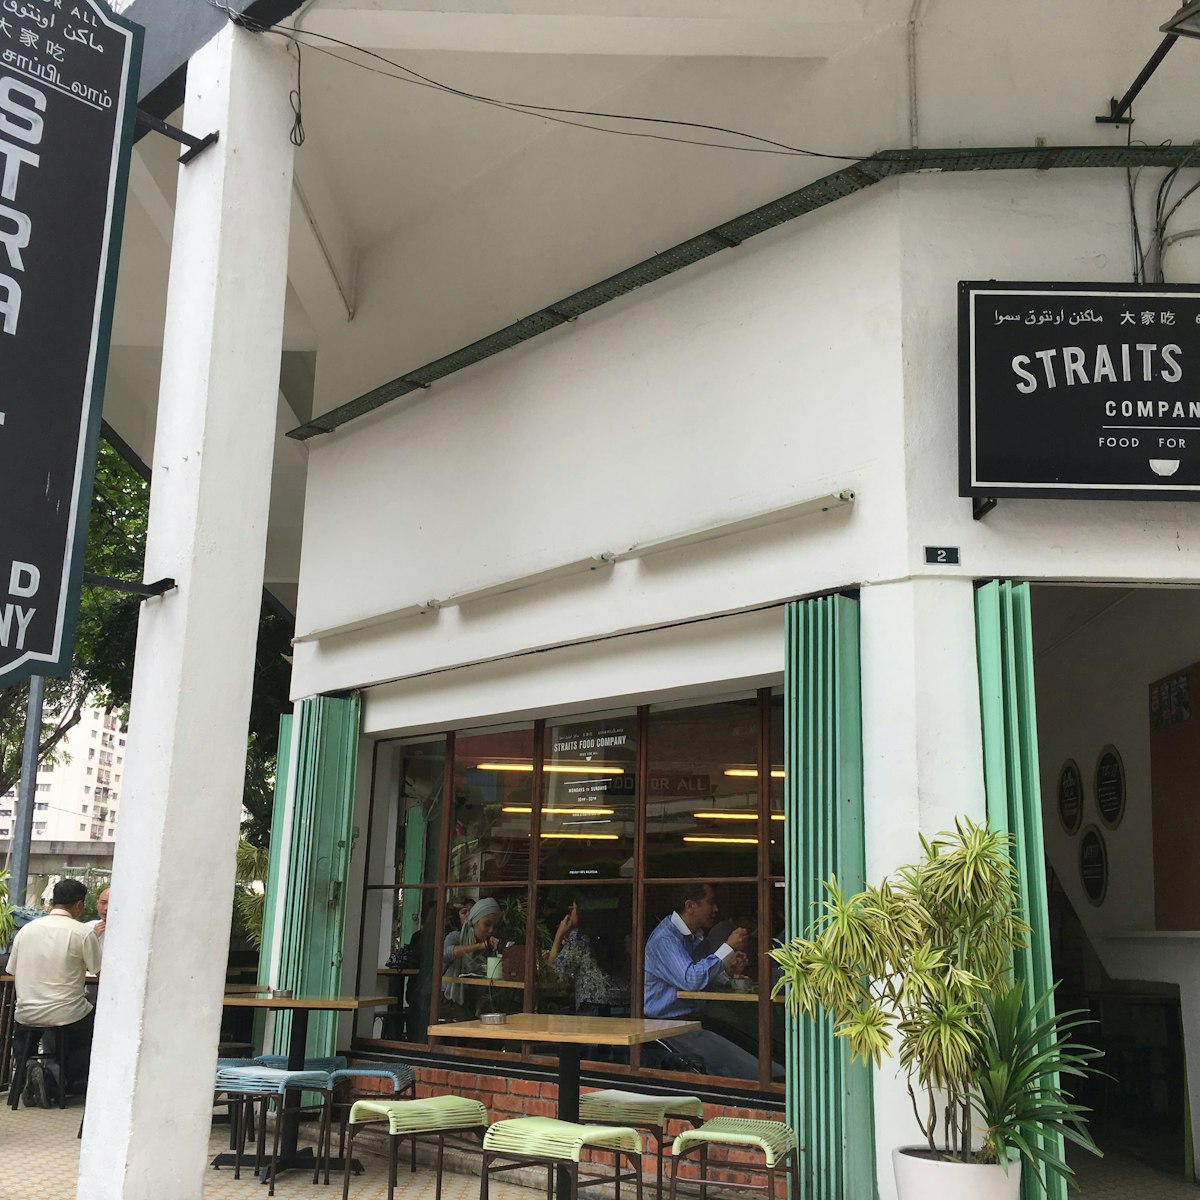 Straits Food Company. The shop occupies a corner lot decked out with old-school stools and Nyonya-style tiles.